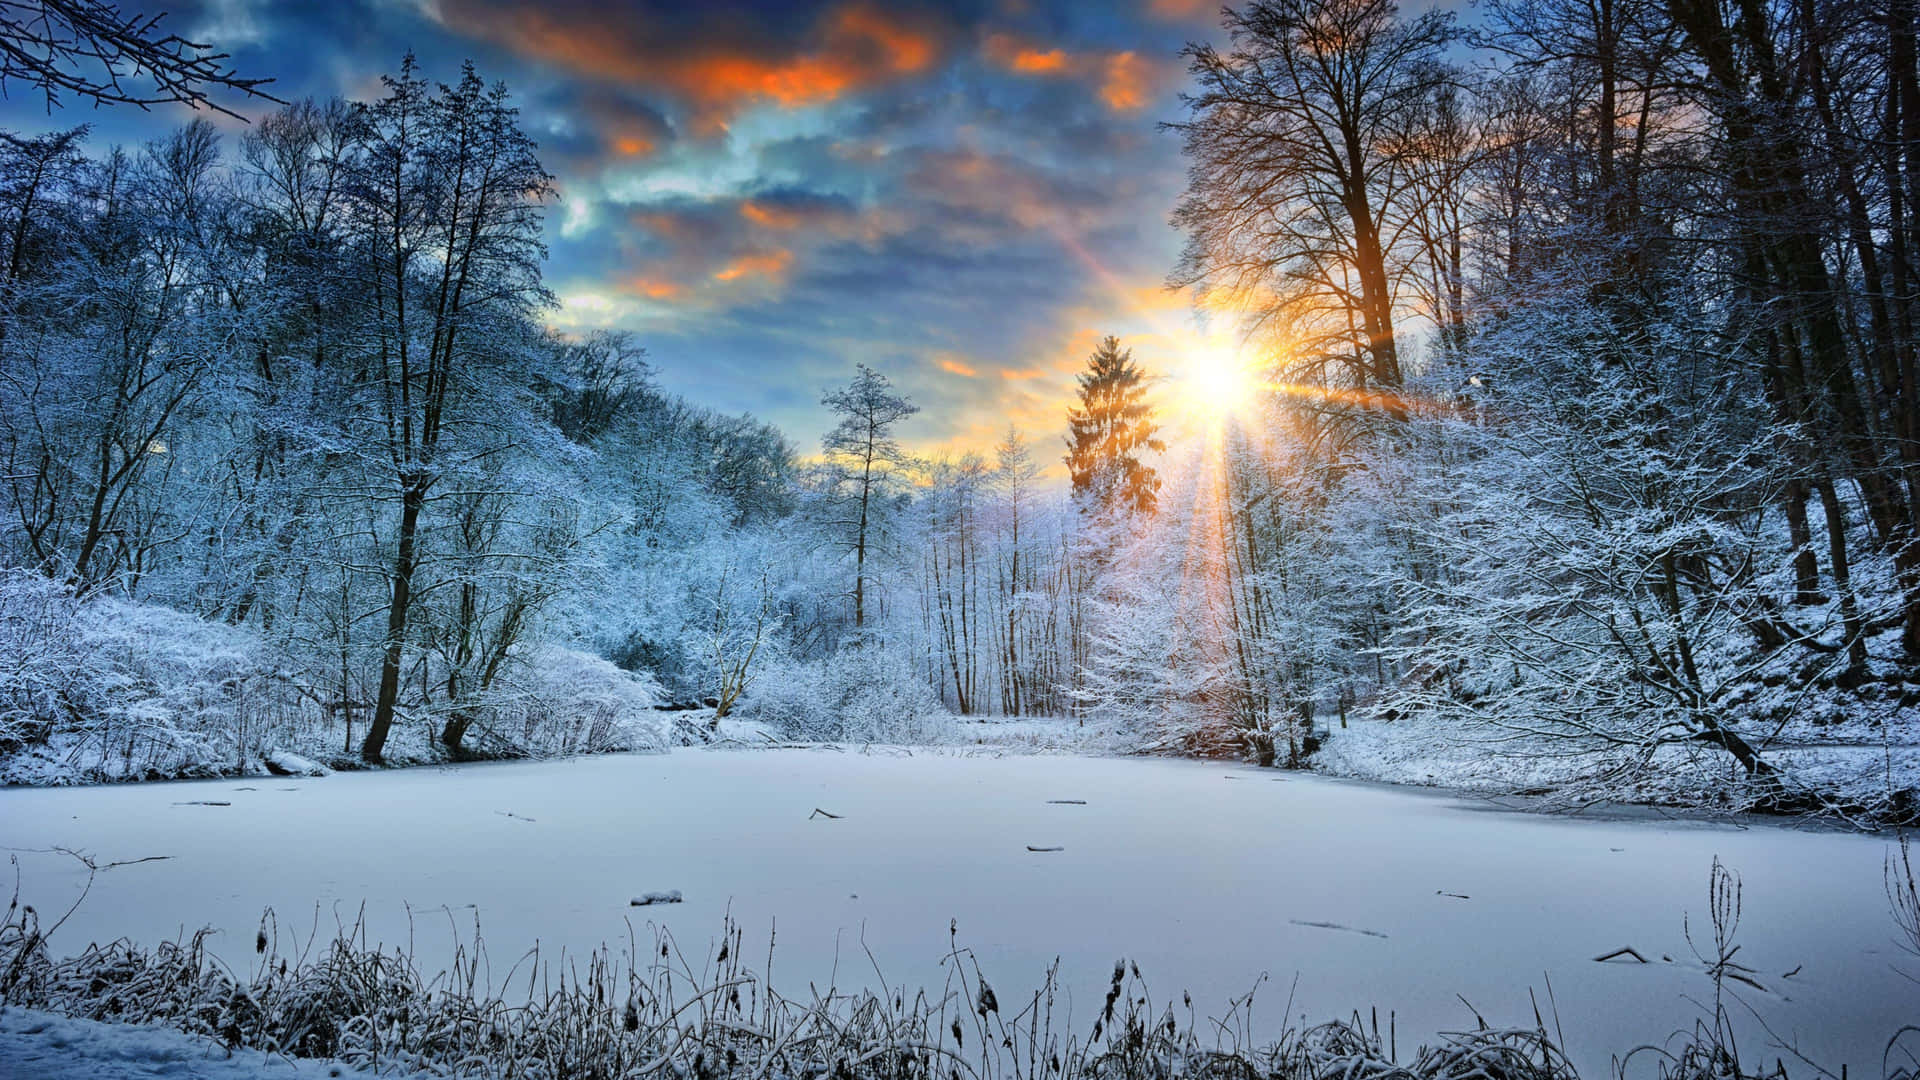 Let the peaceful winter sun warm your heart.